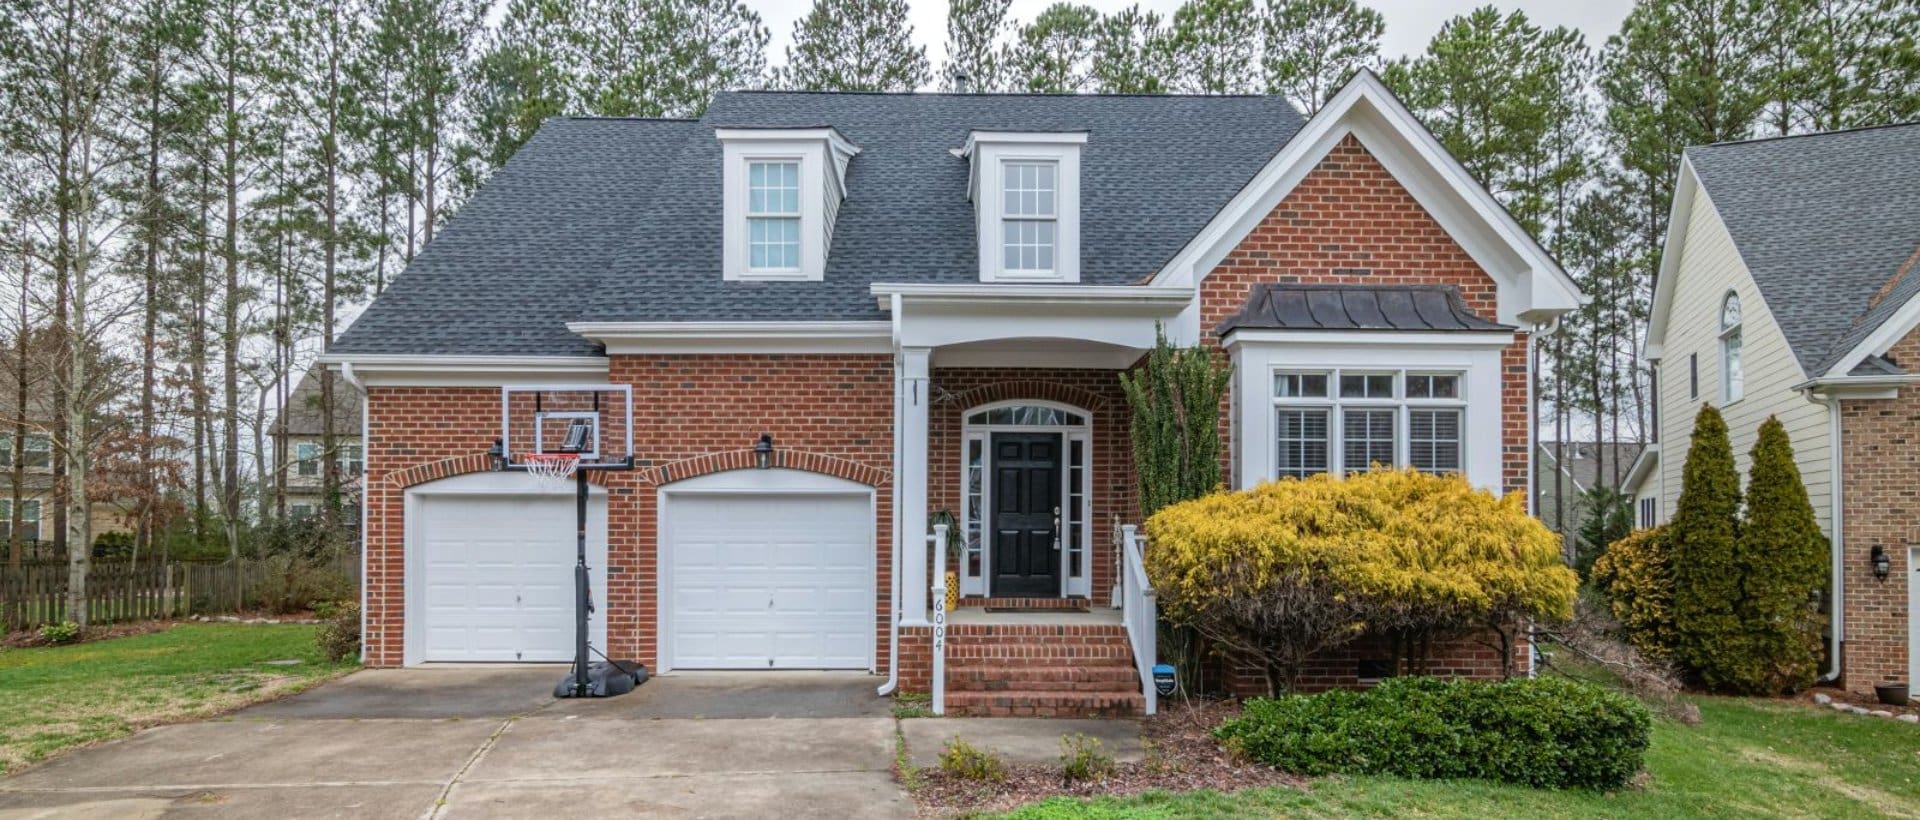 A house with a basketball hoop and trees in the background.